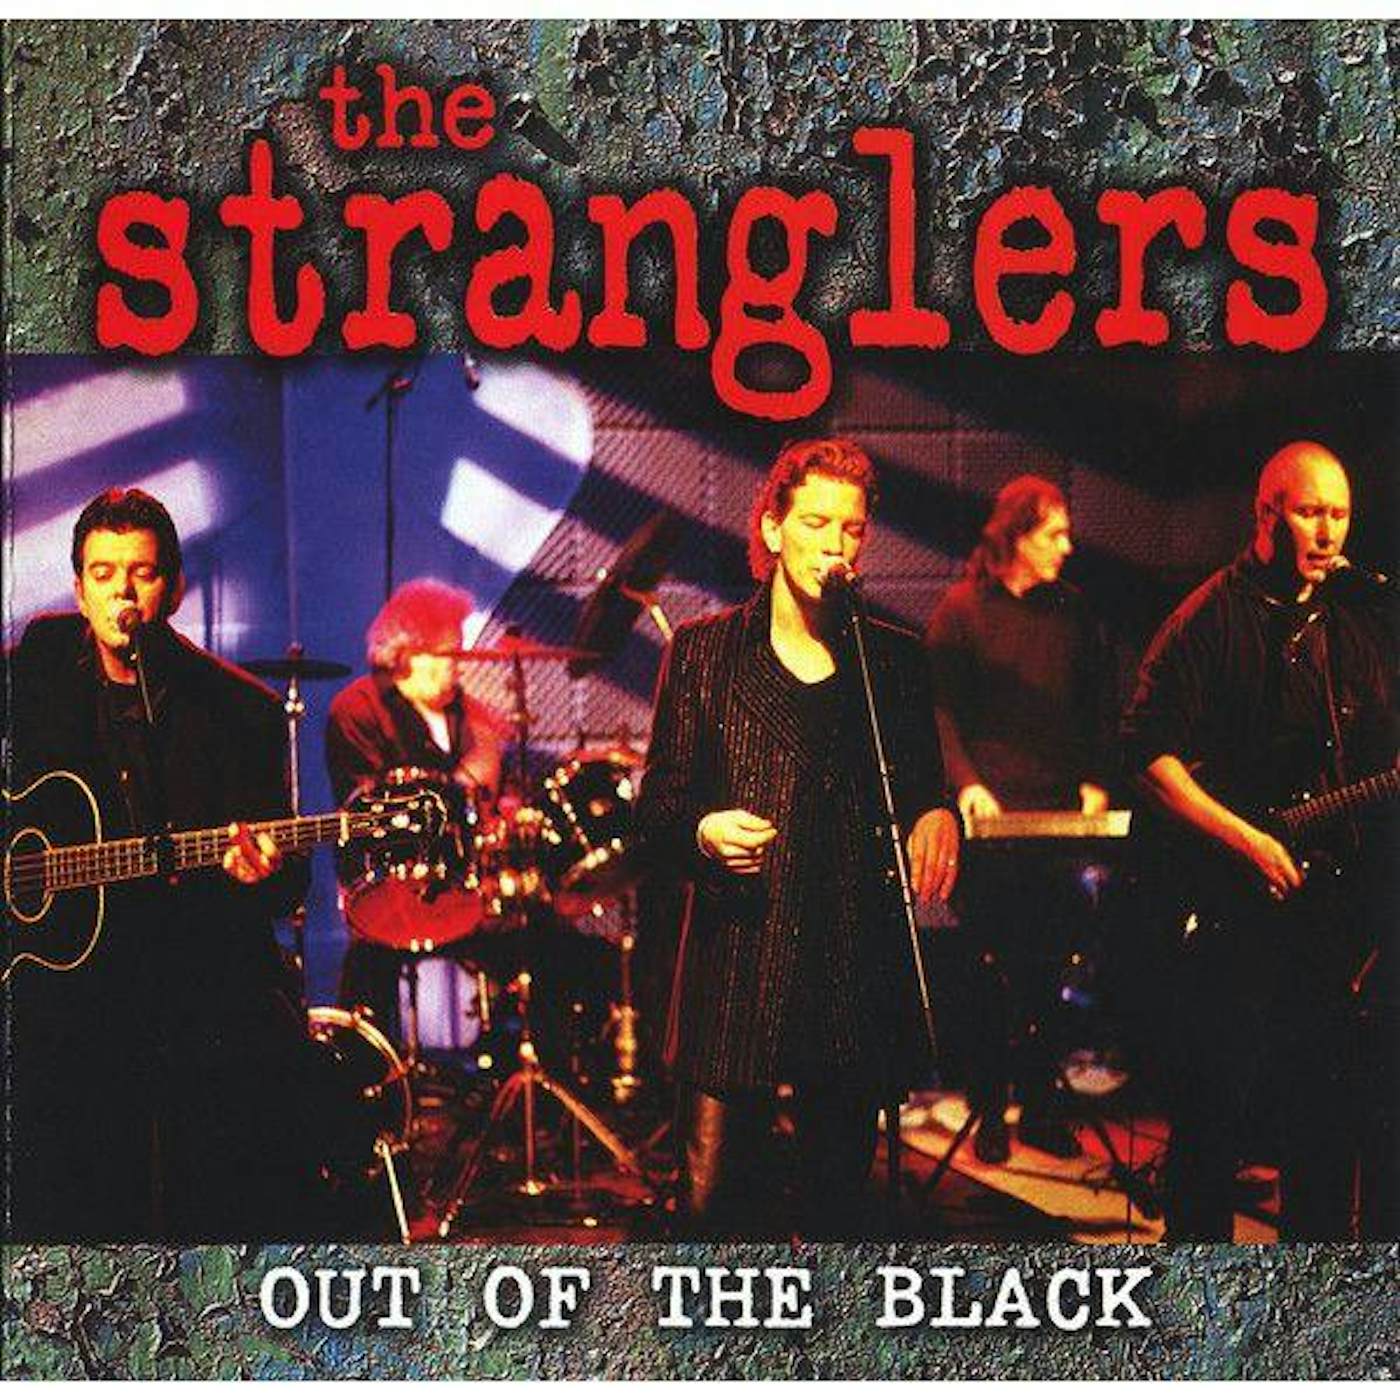 The Stranglers OUT OF THE BLACK CD